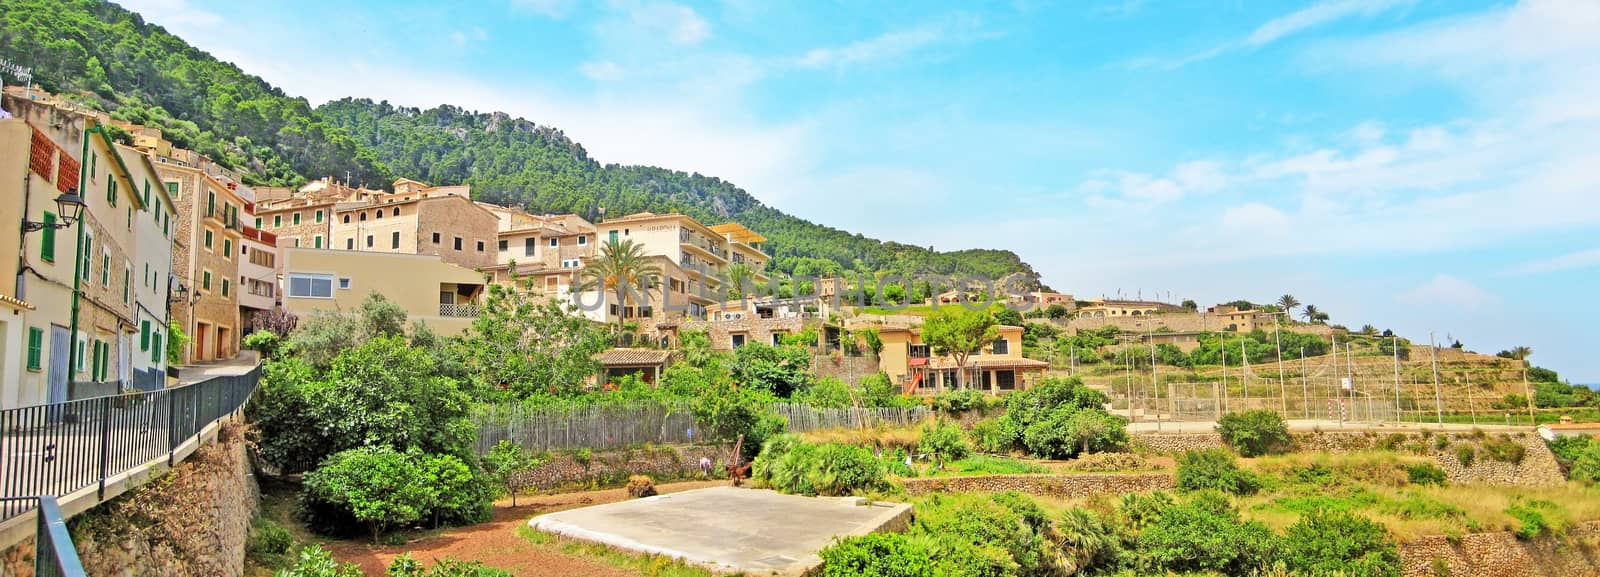 Banyalbufar, Spain - June 23, 2008: Panorama view over the village in the north of Majorca. Houses and hotels, square and terraced hill in front.